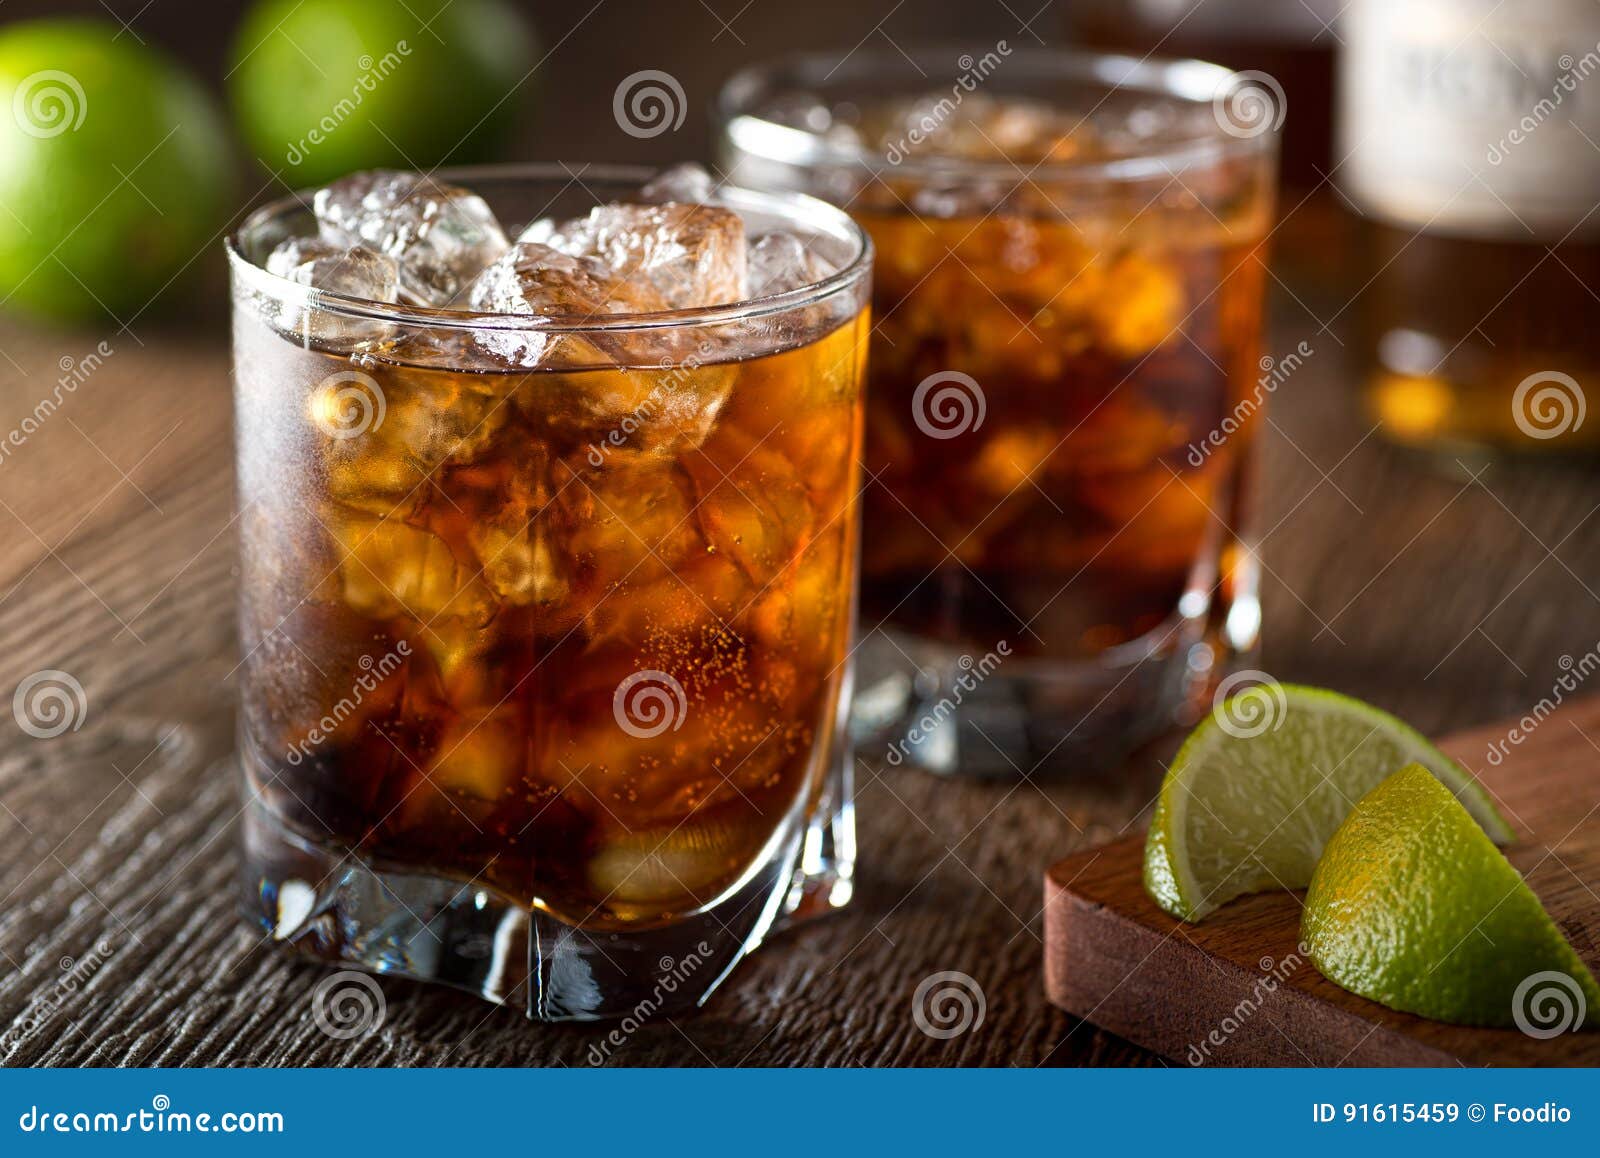 rum and cola